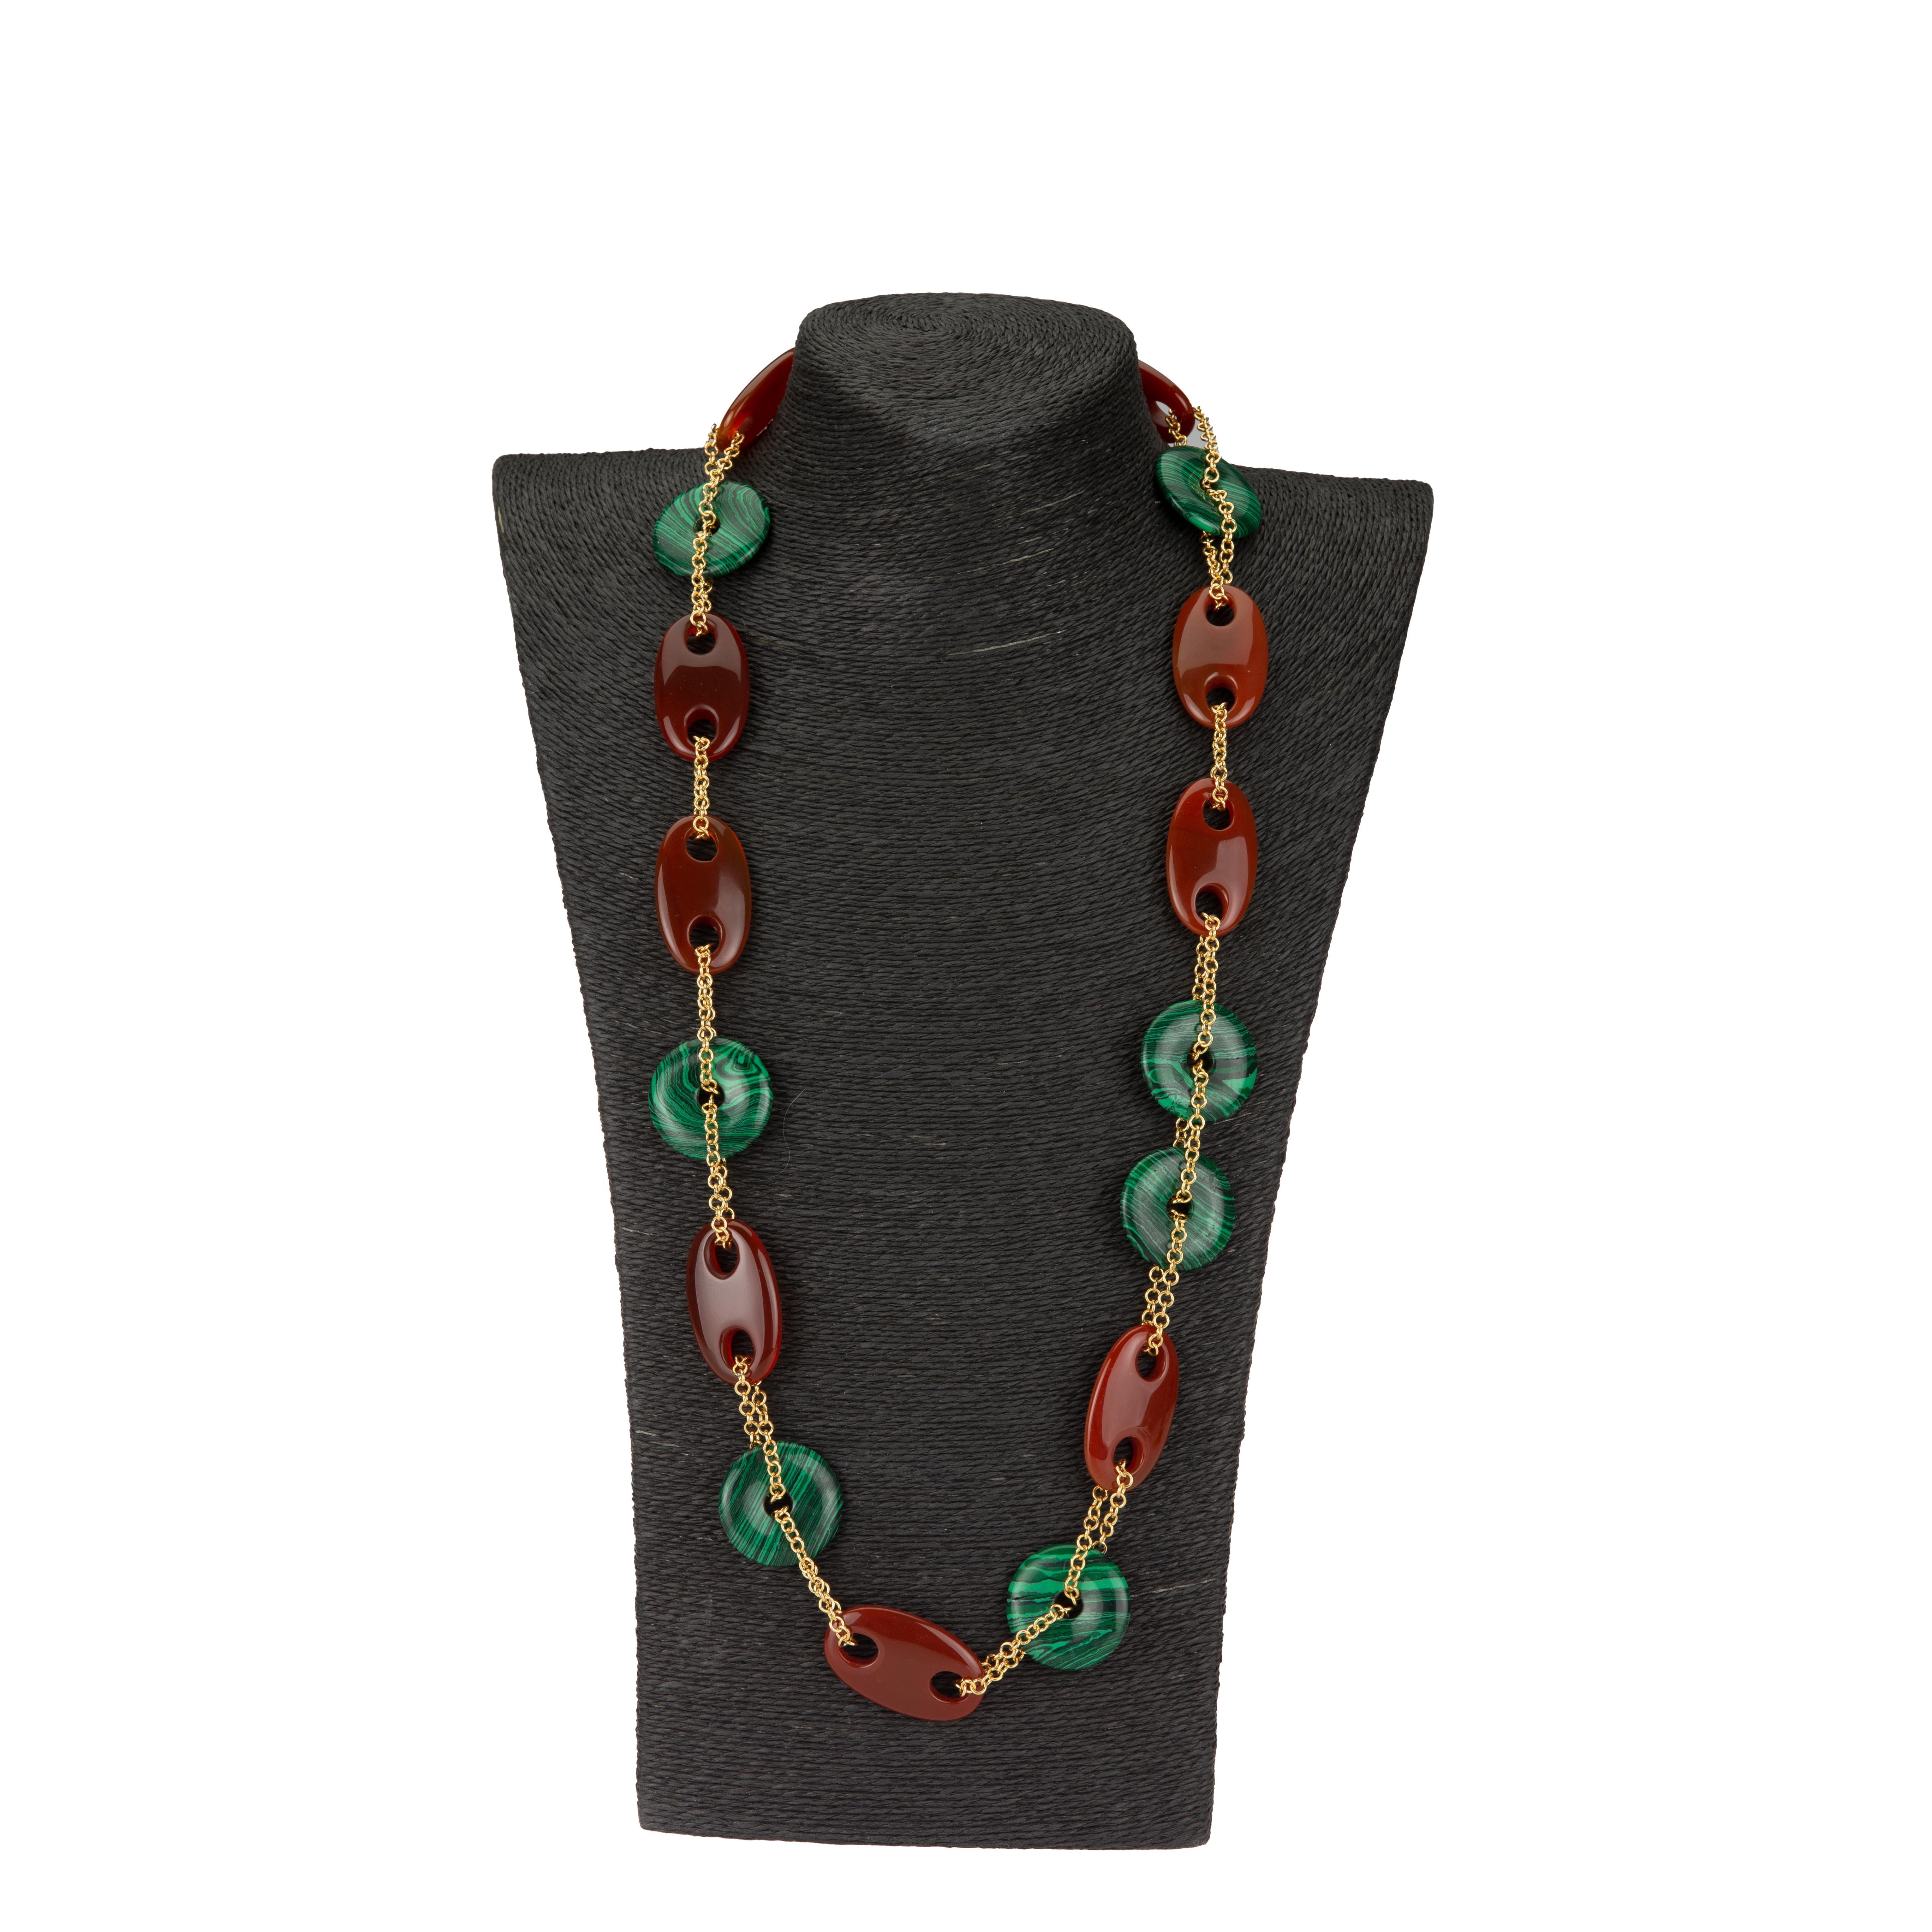 Long carved carnelian and malachite necklace, vermeil, 80 cm total length.
All Giulia Colussi jewelry is new and has never been previously owned or worn. Each item will arrive at your door beautifully gift wrapped in our boxes, put inside an elegant